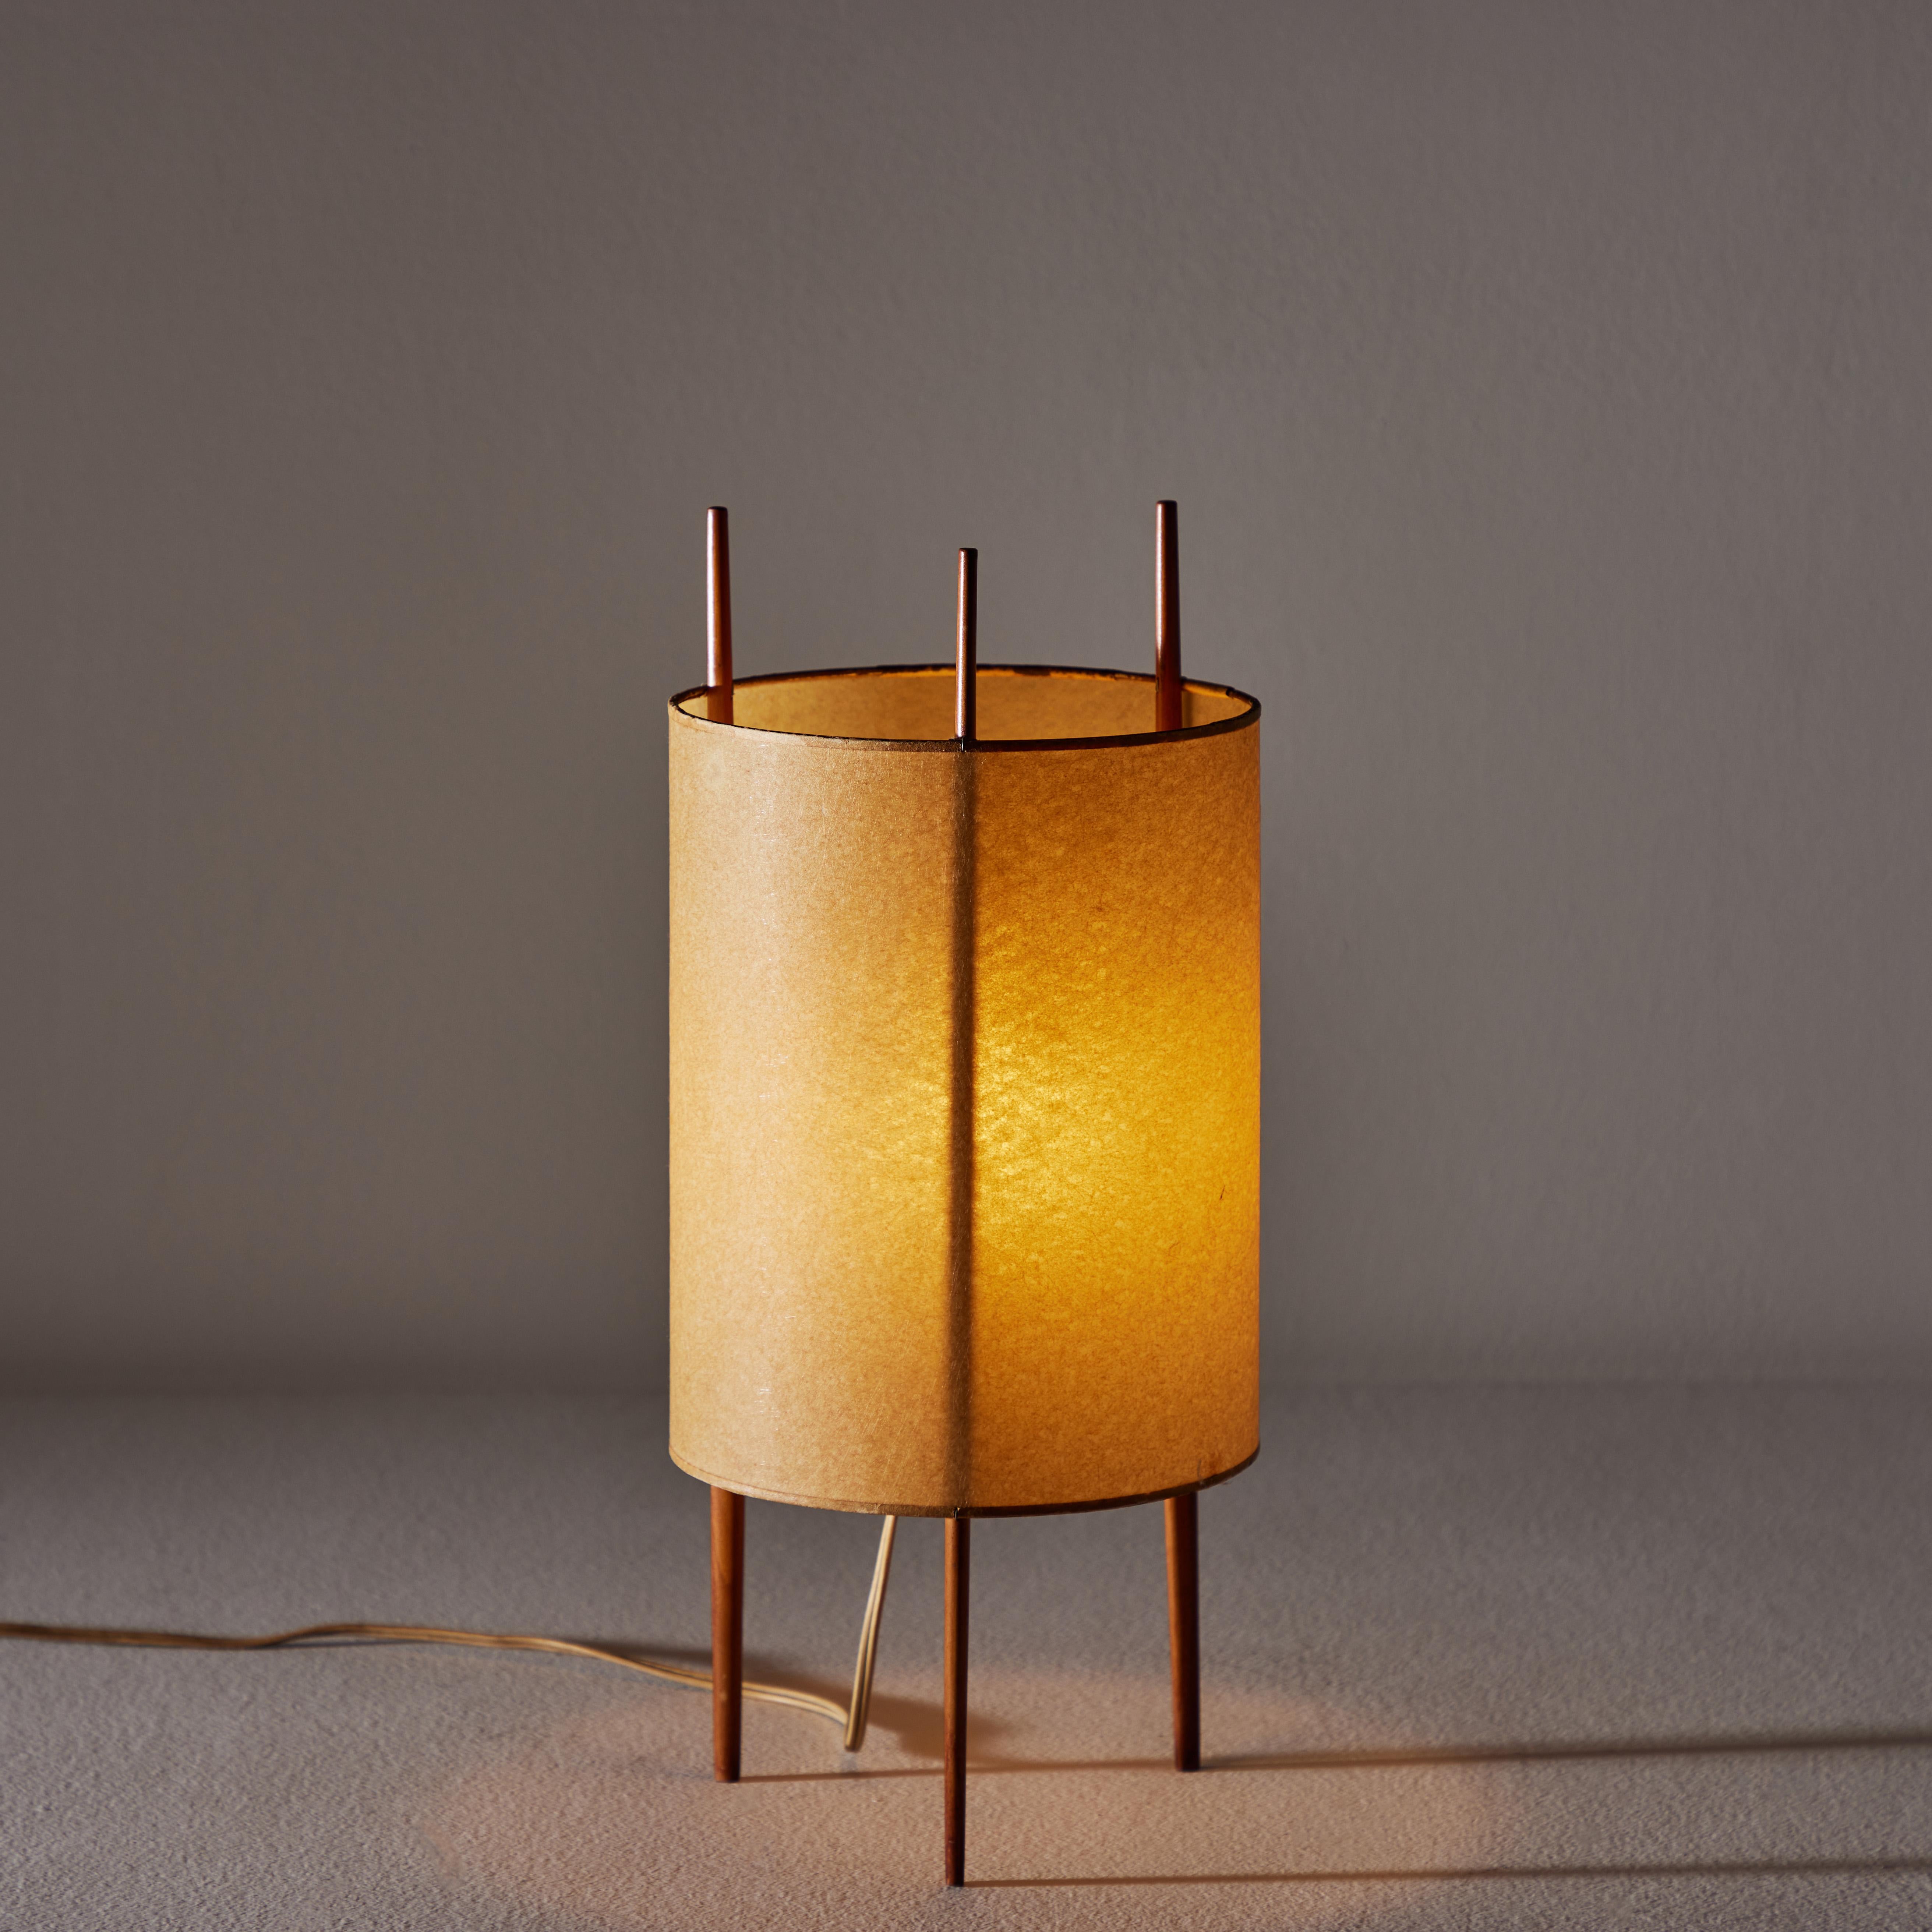 Rare and original table lamp by Isamu Noguchi for Knoll. Designed and manufactured by Knoll in the US circa the 1940s. Natural parchment shade is gently hoisted by three cherry wood pillars. Holds one E14 socket and bulb recommendation consists of